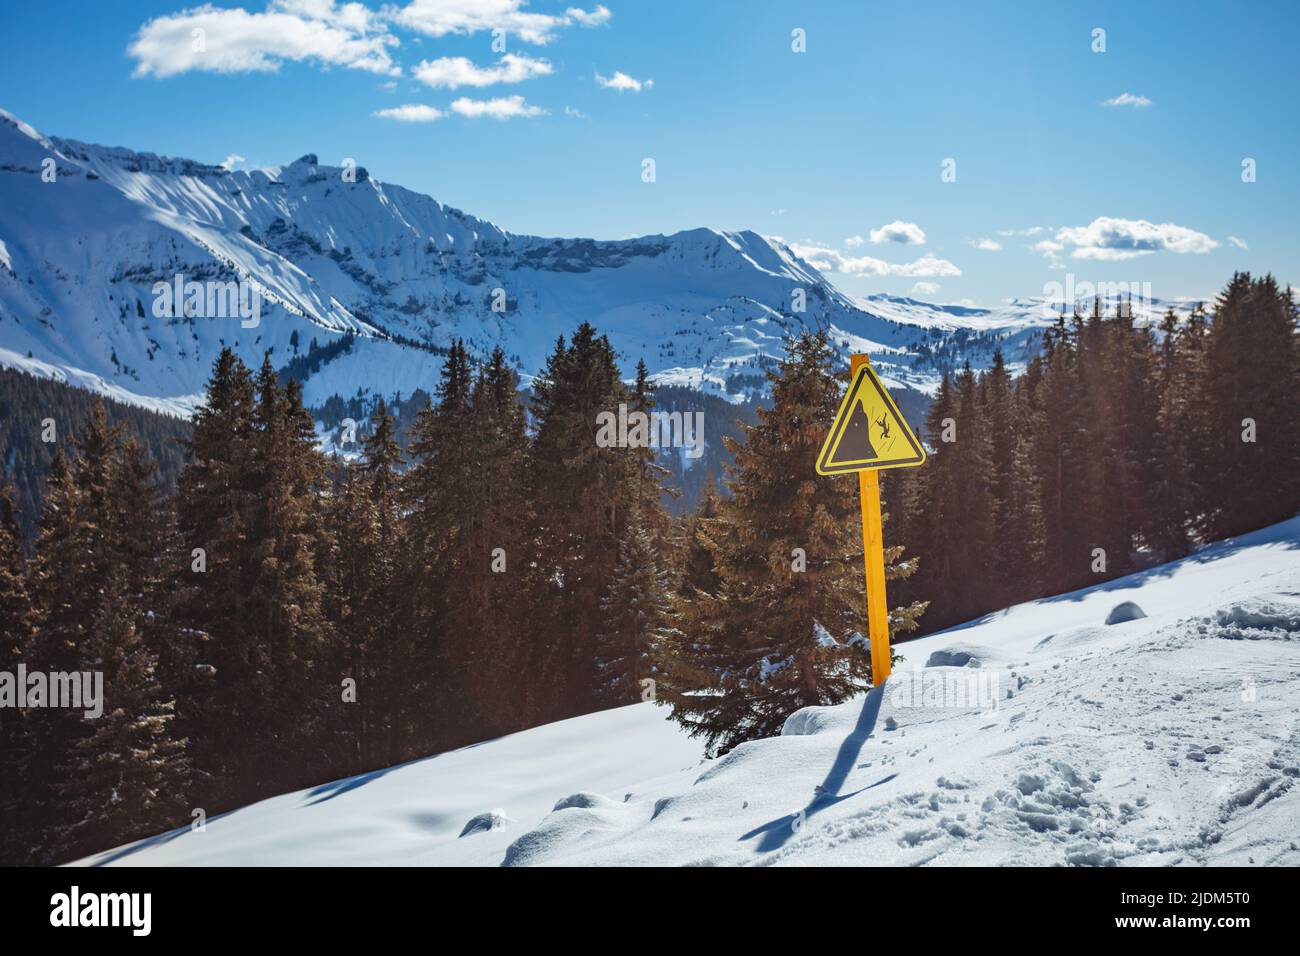 Danger sign on side of the mountain ski track in mountains Stock Photo